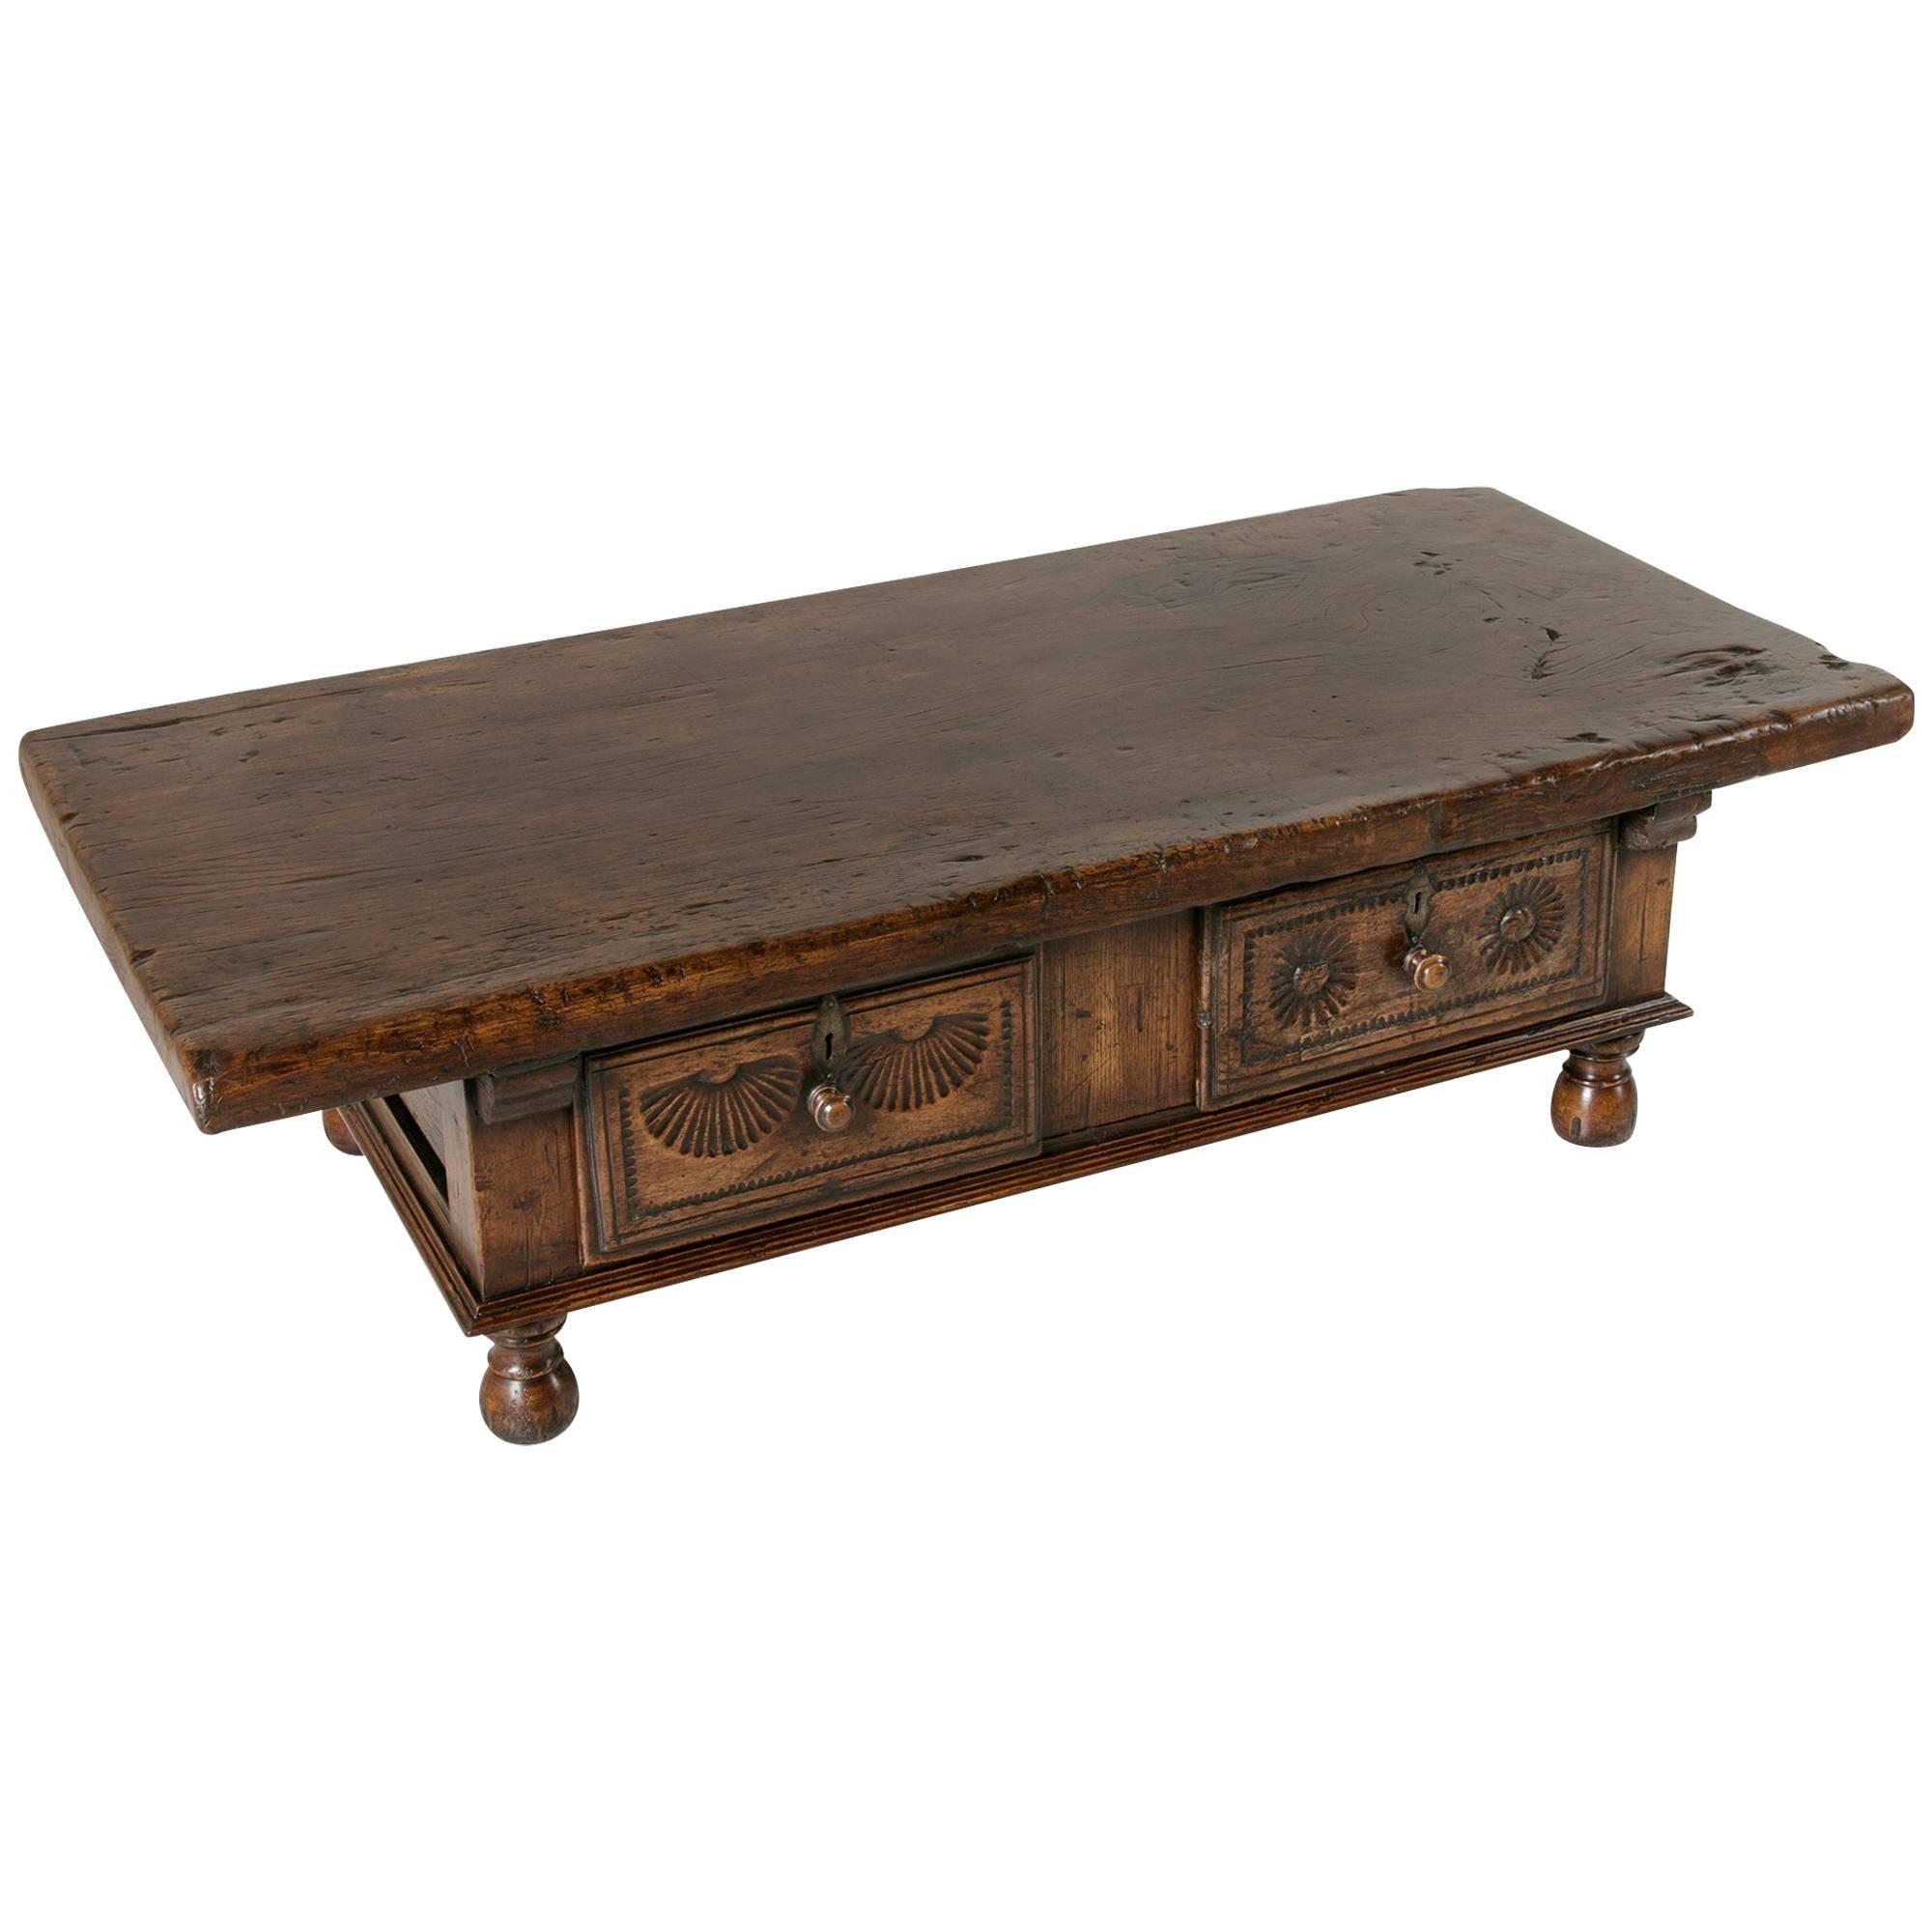 18th Century Spanish Coffee Table Made of One Single Piece of Walnut Two Drawers